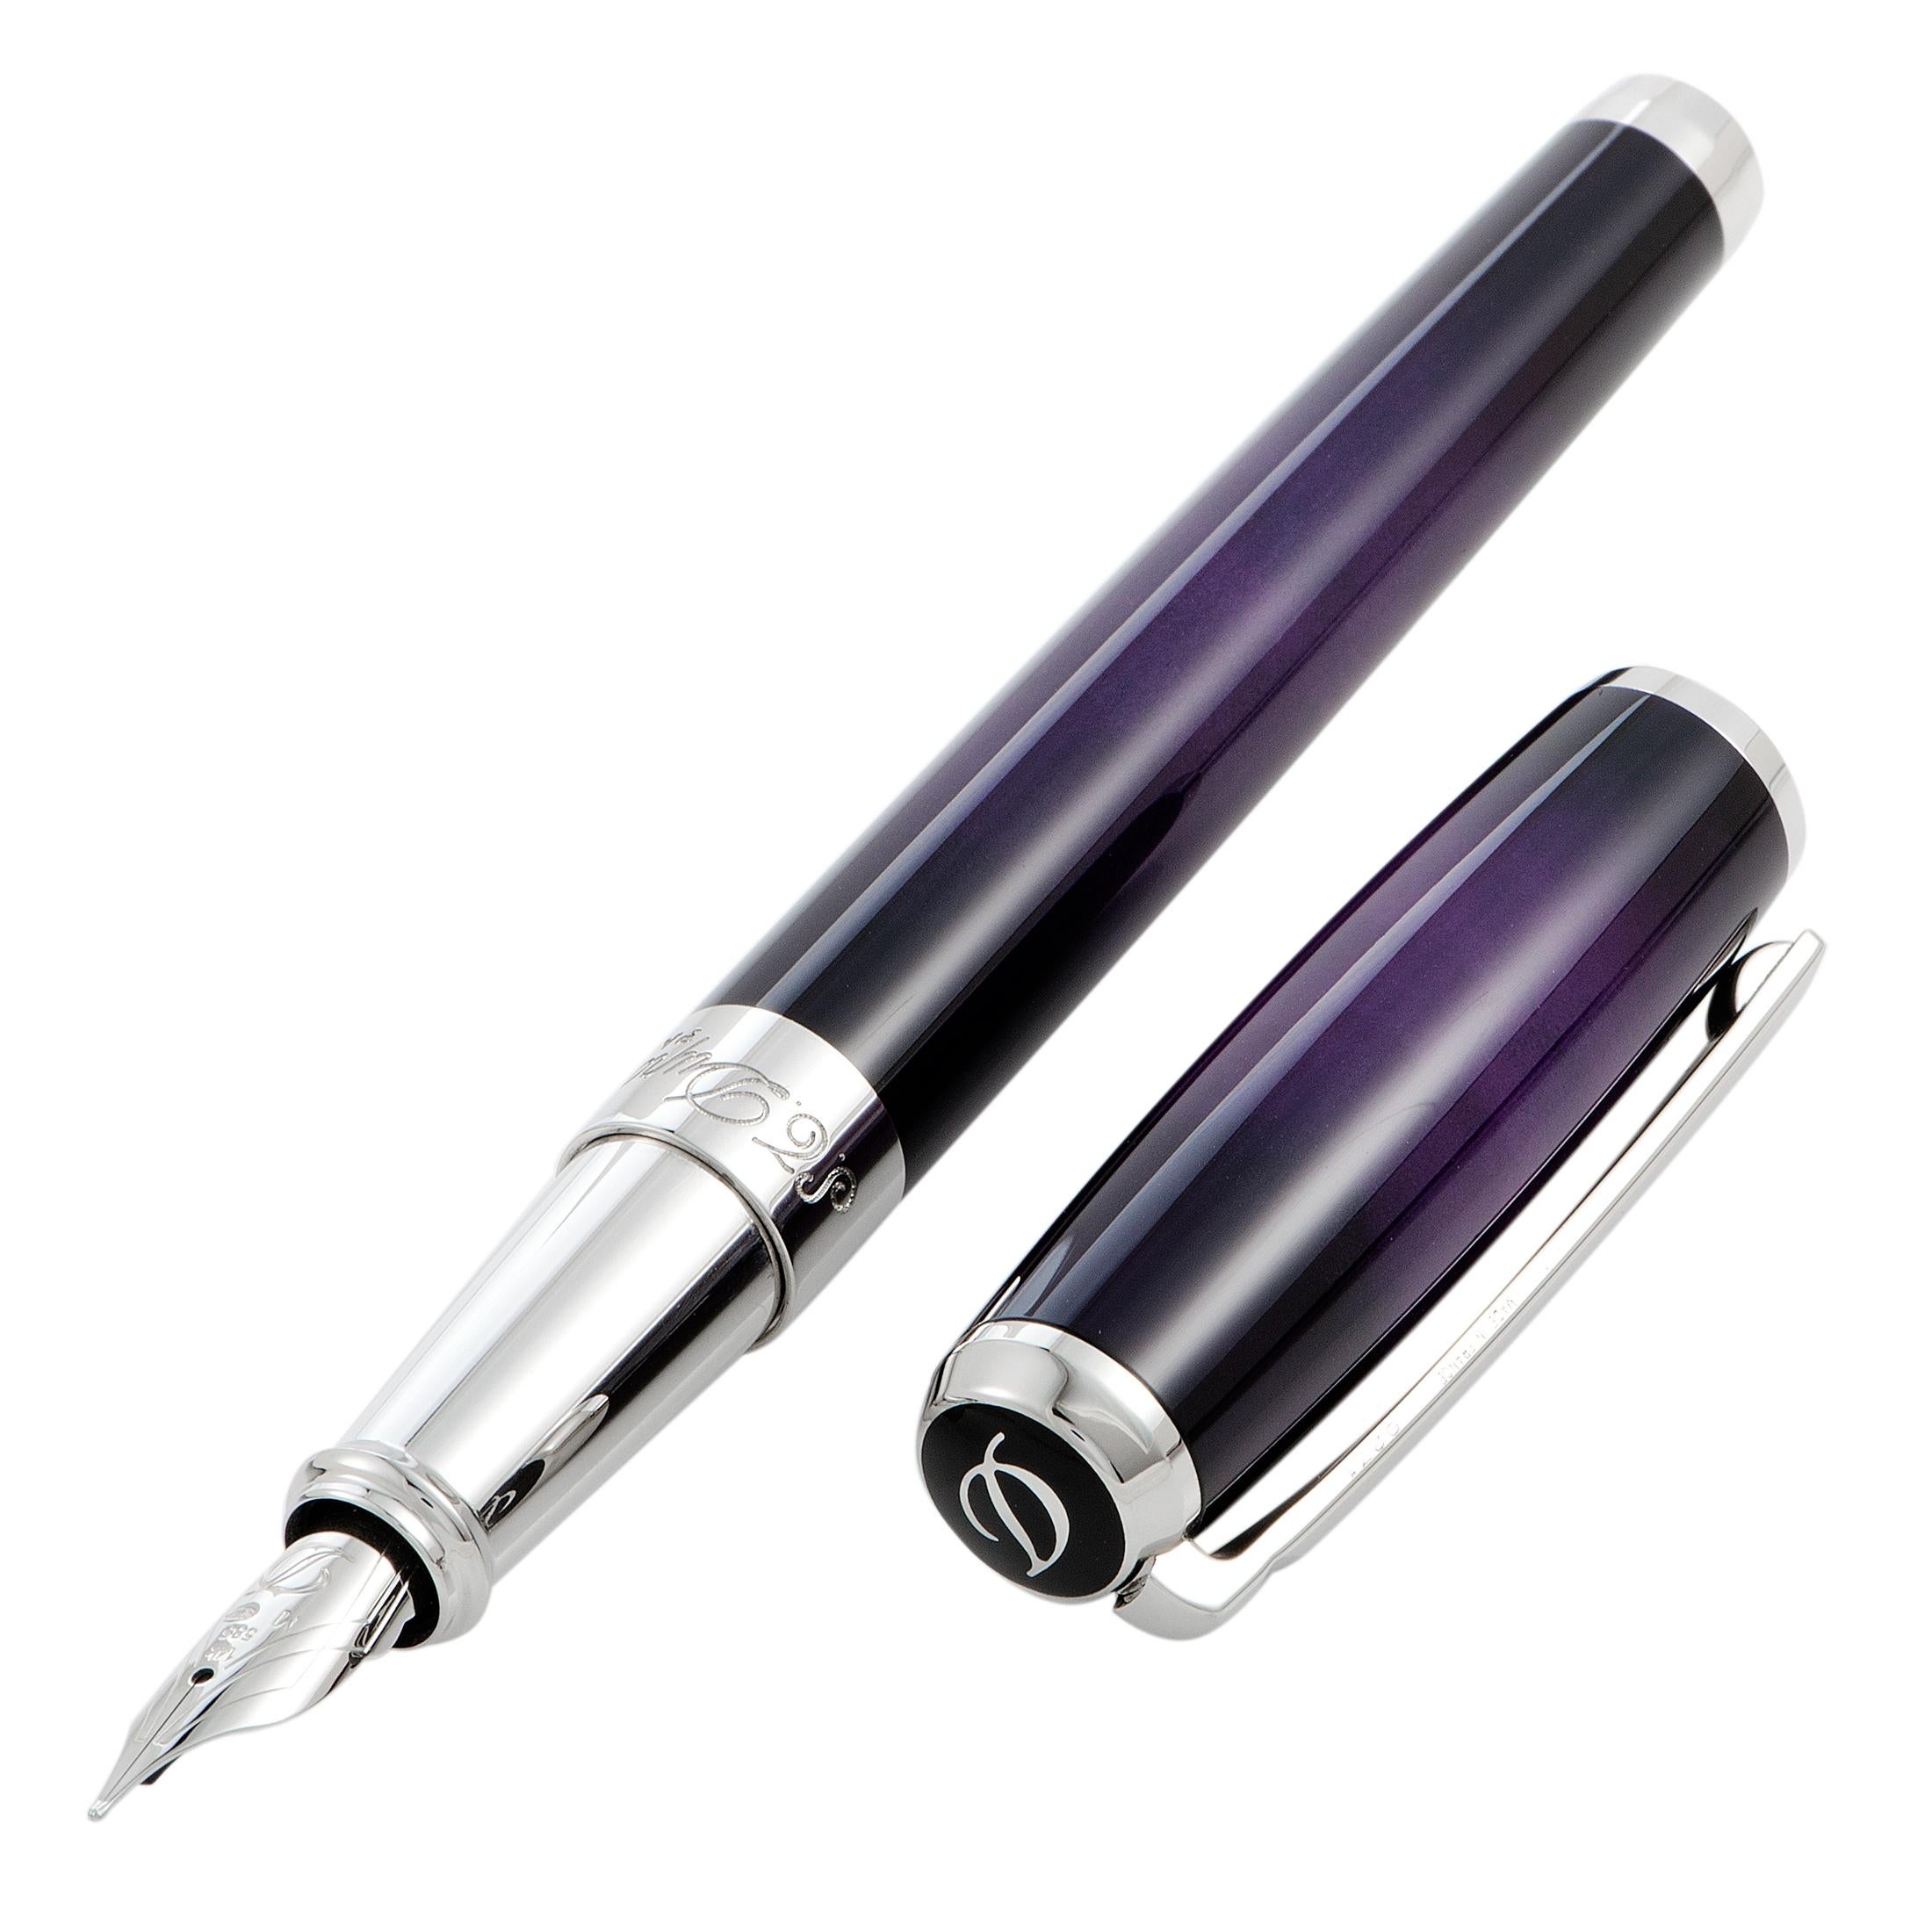 Make a bold statement with every word that you write with this fantastic fountain pen that combines the elegant appeal of understated design with the contemporary feel of purple lacquer. The pen is presented by S.T. Dupont within the refined “Line